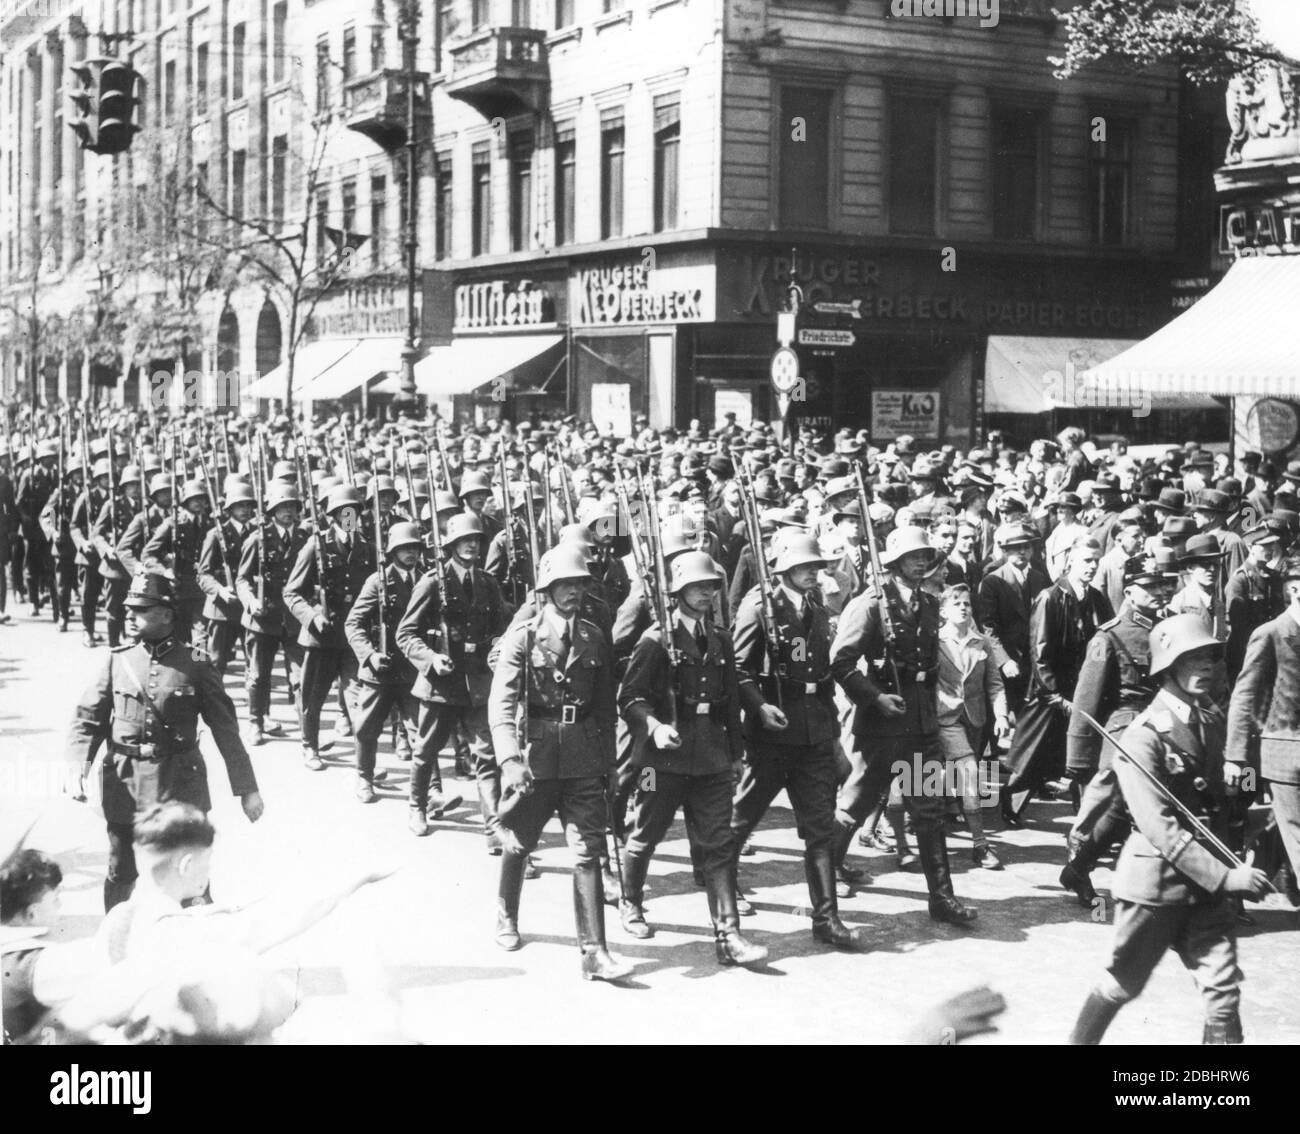 'The photograph from April 1935 shows the deployment of a guard unit of the new German Luftwaffe at the street corner Unter den Linden, Friedrichstrasse in Berlin. Accompanied by the spectators, the Luftwaffe soldiers walk to the changing of the guard. It was not until March 1935 that general conscription was reintroduced in the National Socialist Germany. The cigar store ''Krueger und Oberbeck'' is located on the street corner.' Stock Photo